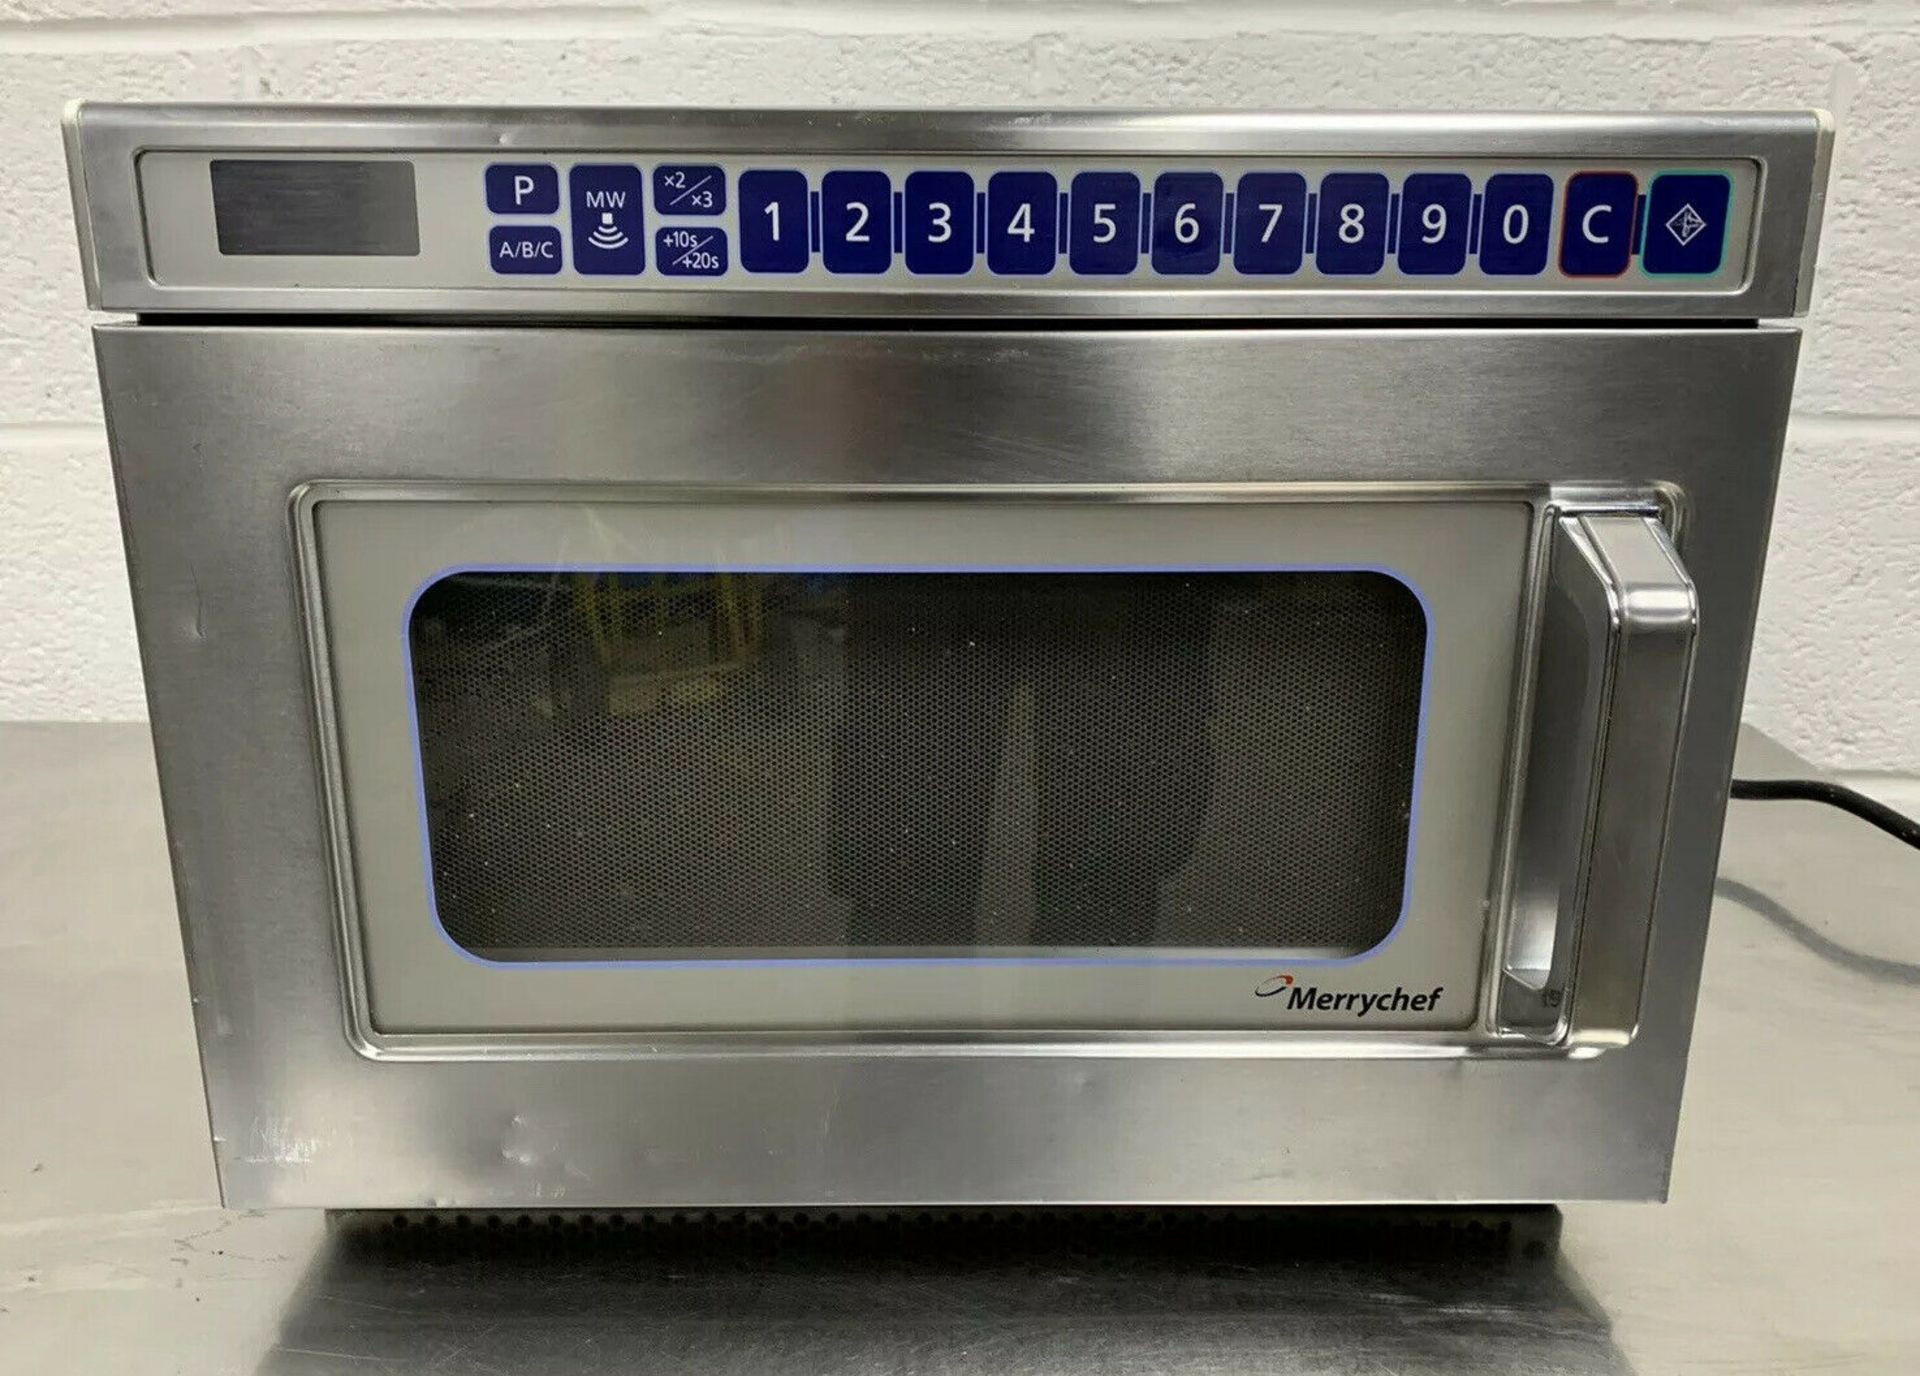 Merrychef MD1800 Microwave Oven - Image 5 of 6